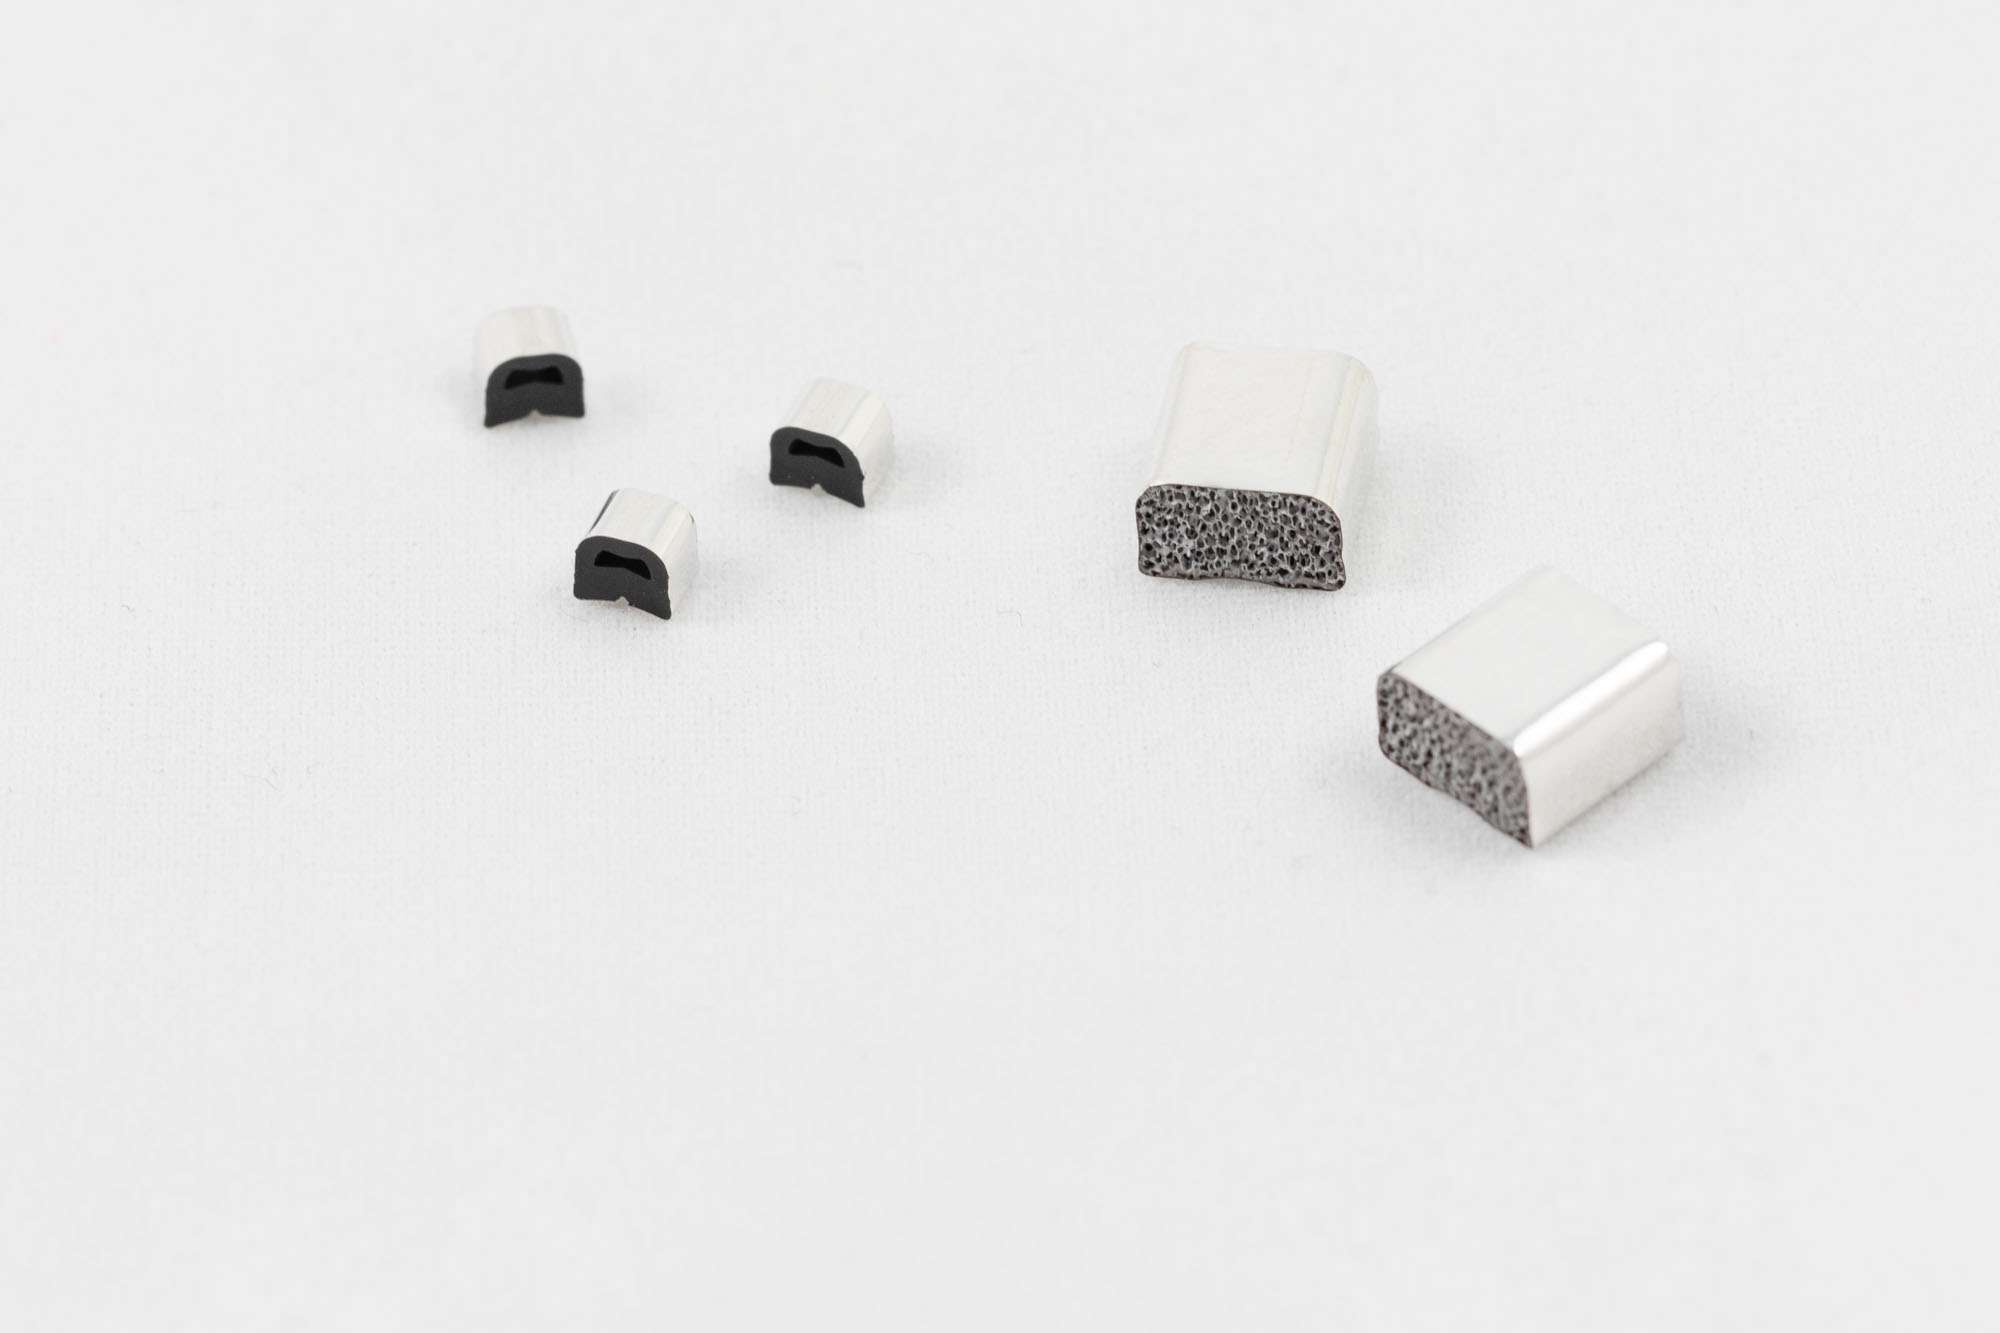 Soft SMD contact foam used for EMI grounding